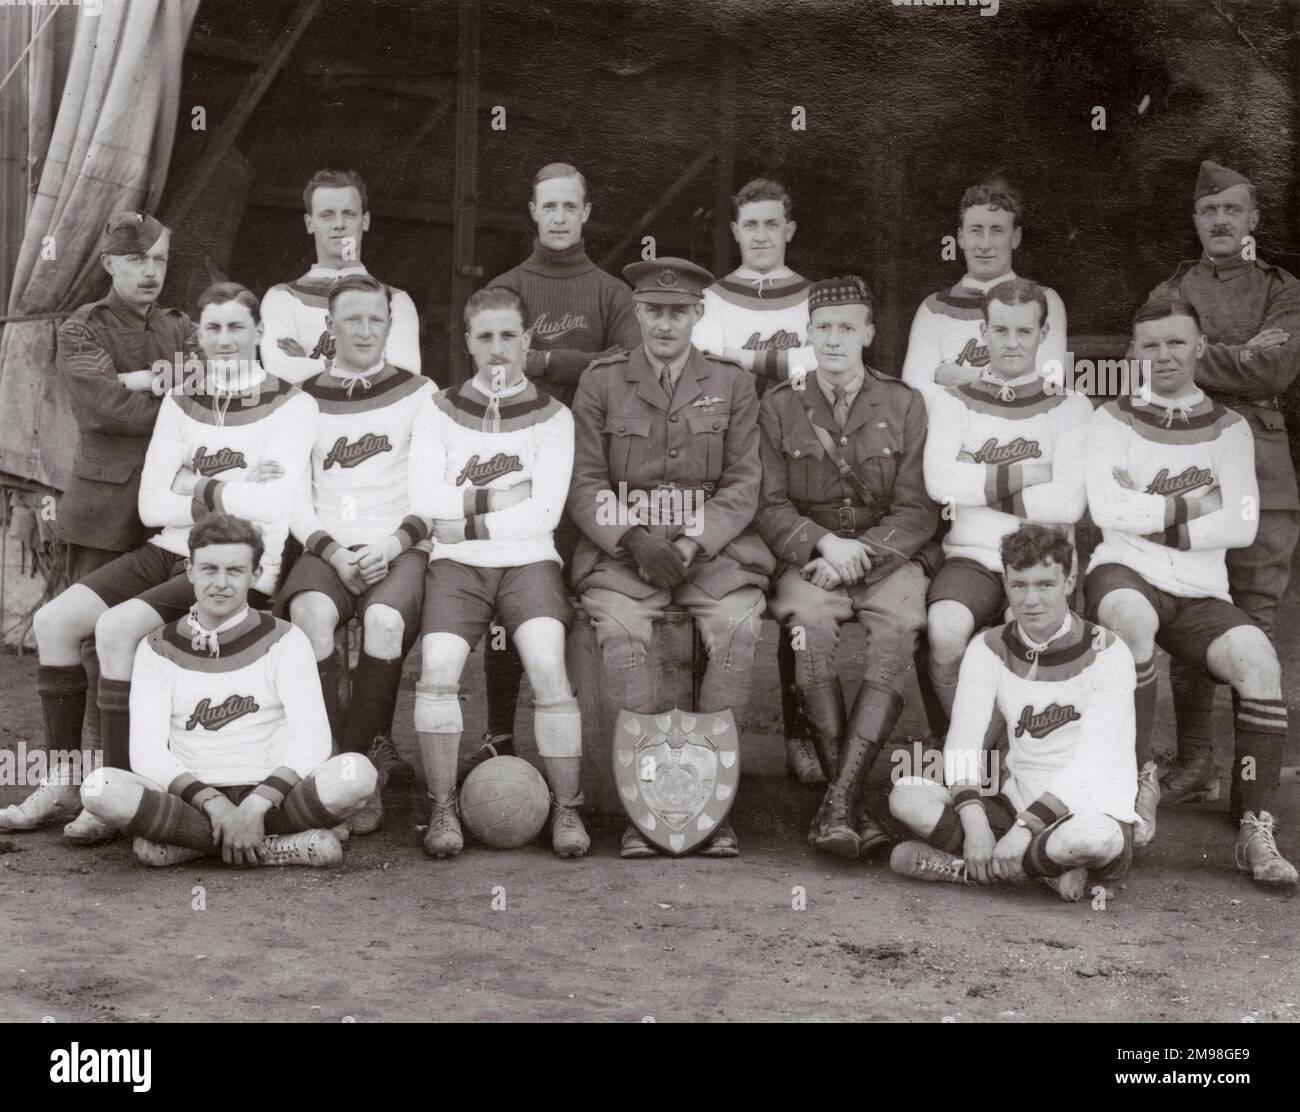 Group photo, 53 Squadron RFC football team and officers, with trophy, British Expeditionary Force, Abele (Abeele), West Flanders, Belgium, February 1918. Stock Photo